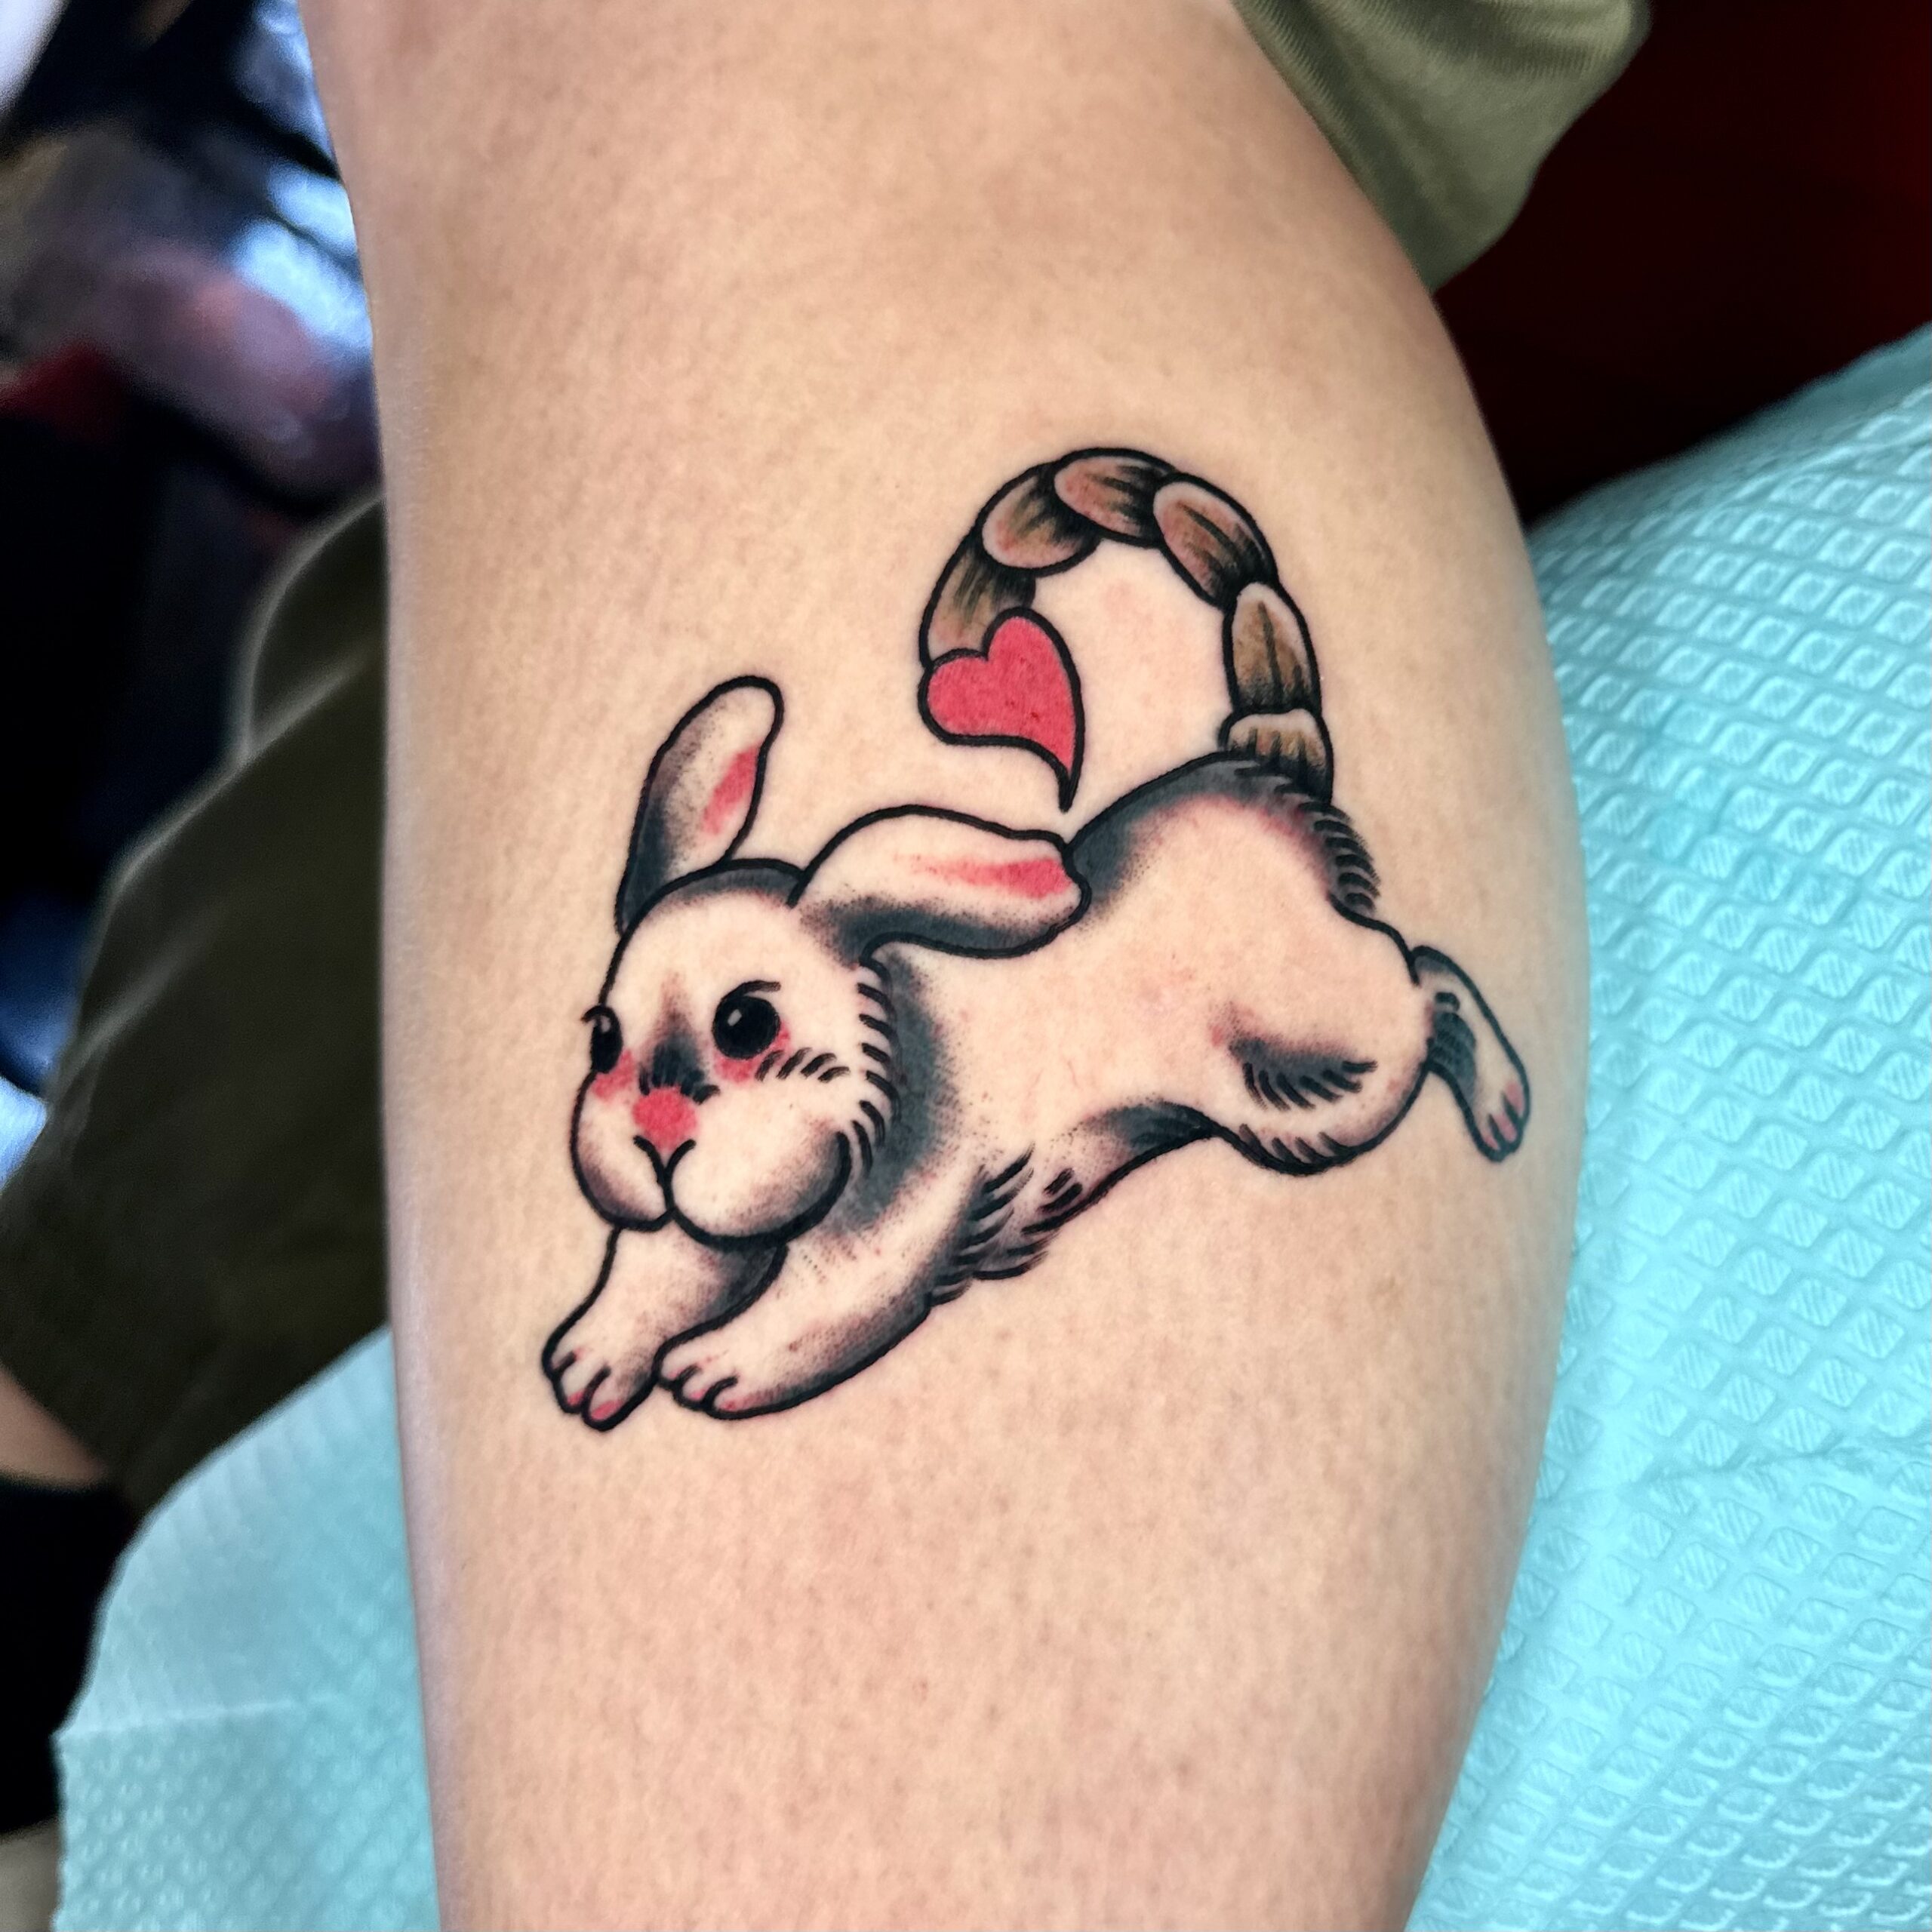 Tattoo of a bunny from a tattoo shop in Dallas